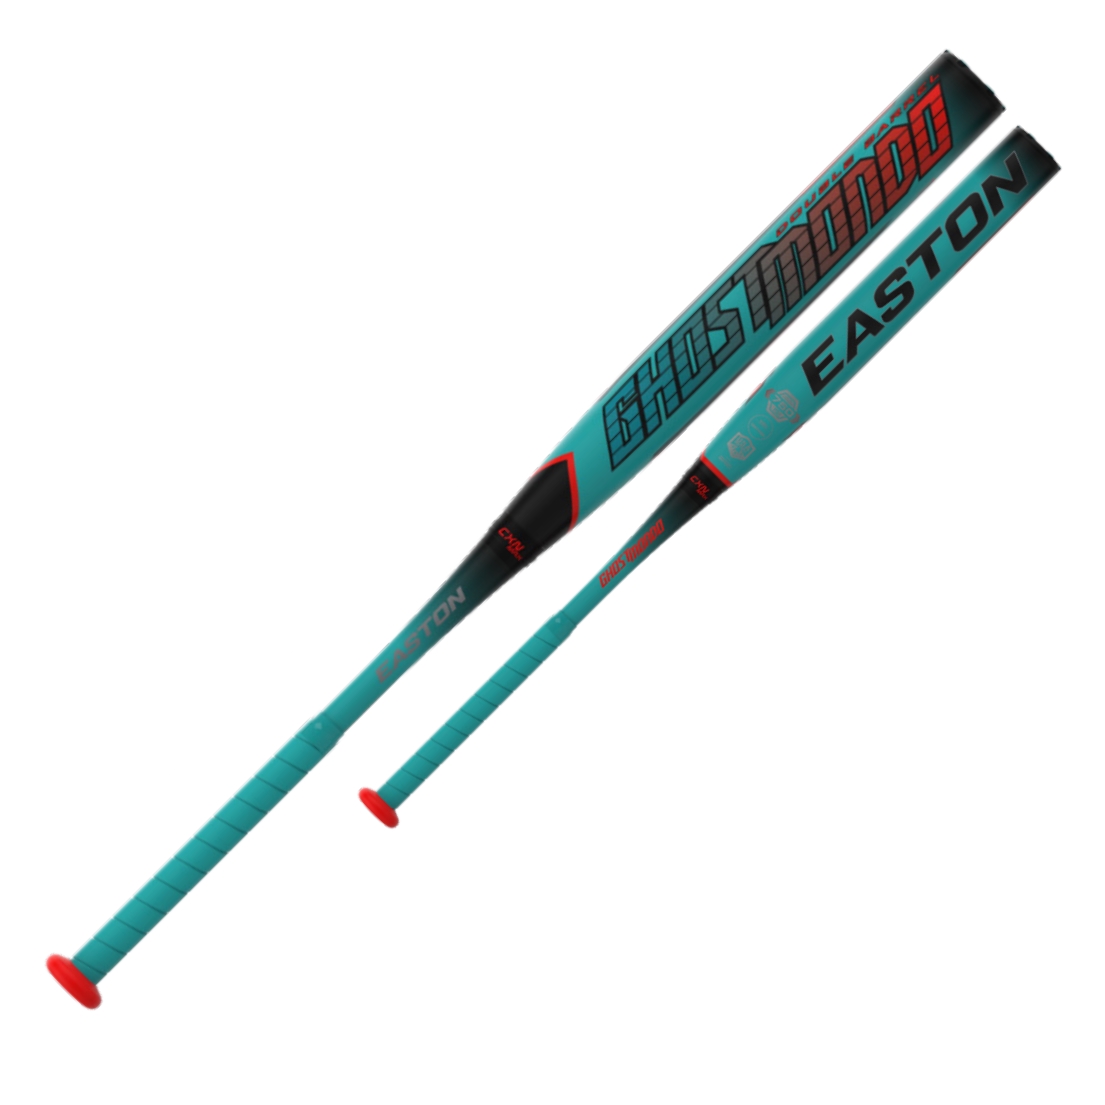 Double Barrel Technology – Delivers soft barrel compression and hot performance straight out of the wrapper   • NEW CXN MAX – Eliminates vibration in the handle of the bat to provide best in class feel • Optimized Player Weighting – Loaded • 12.5” Barrel • Available in 26oz, 27oz, 28oz • Approved for play in USA SOFTBALL & WBSC   Built with Easton’s innovative Double Barrel Technology, the 2022 Ghostmondo delivers low barrel compression right out of the wrapper. The Ghostmondo has been engineered with Easton’s Optimized player swing weighting. Taking into account barrel length, barrel flex and handle stiffness, providing a slight end-load feel with a smooth swing weight for maximum performance. With a 12.5” barrel and our new two-piece CXN MAX technology this bat is approved for USA Softball and WBSC play and has a 1 year warranty.